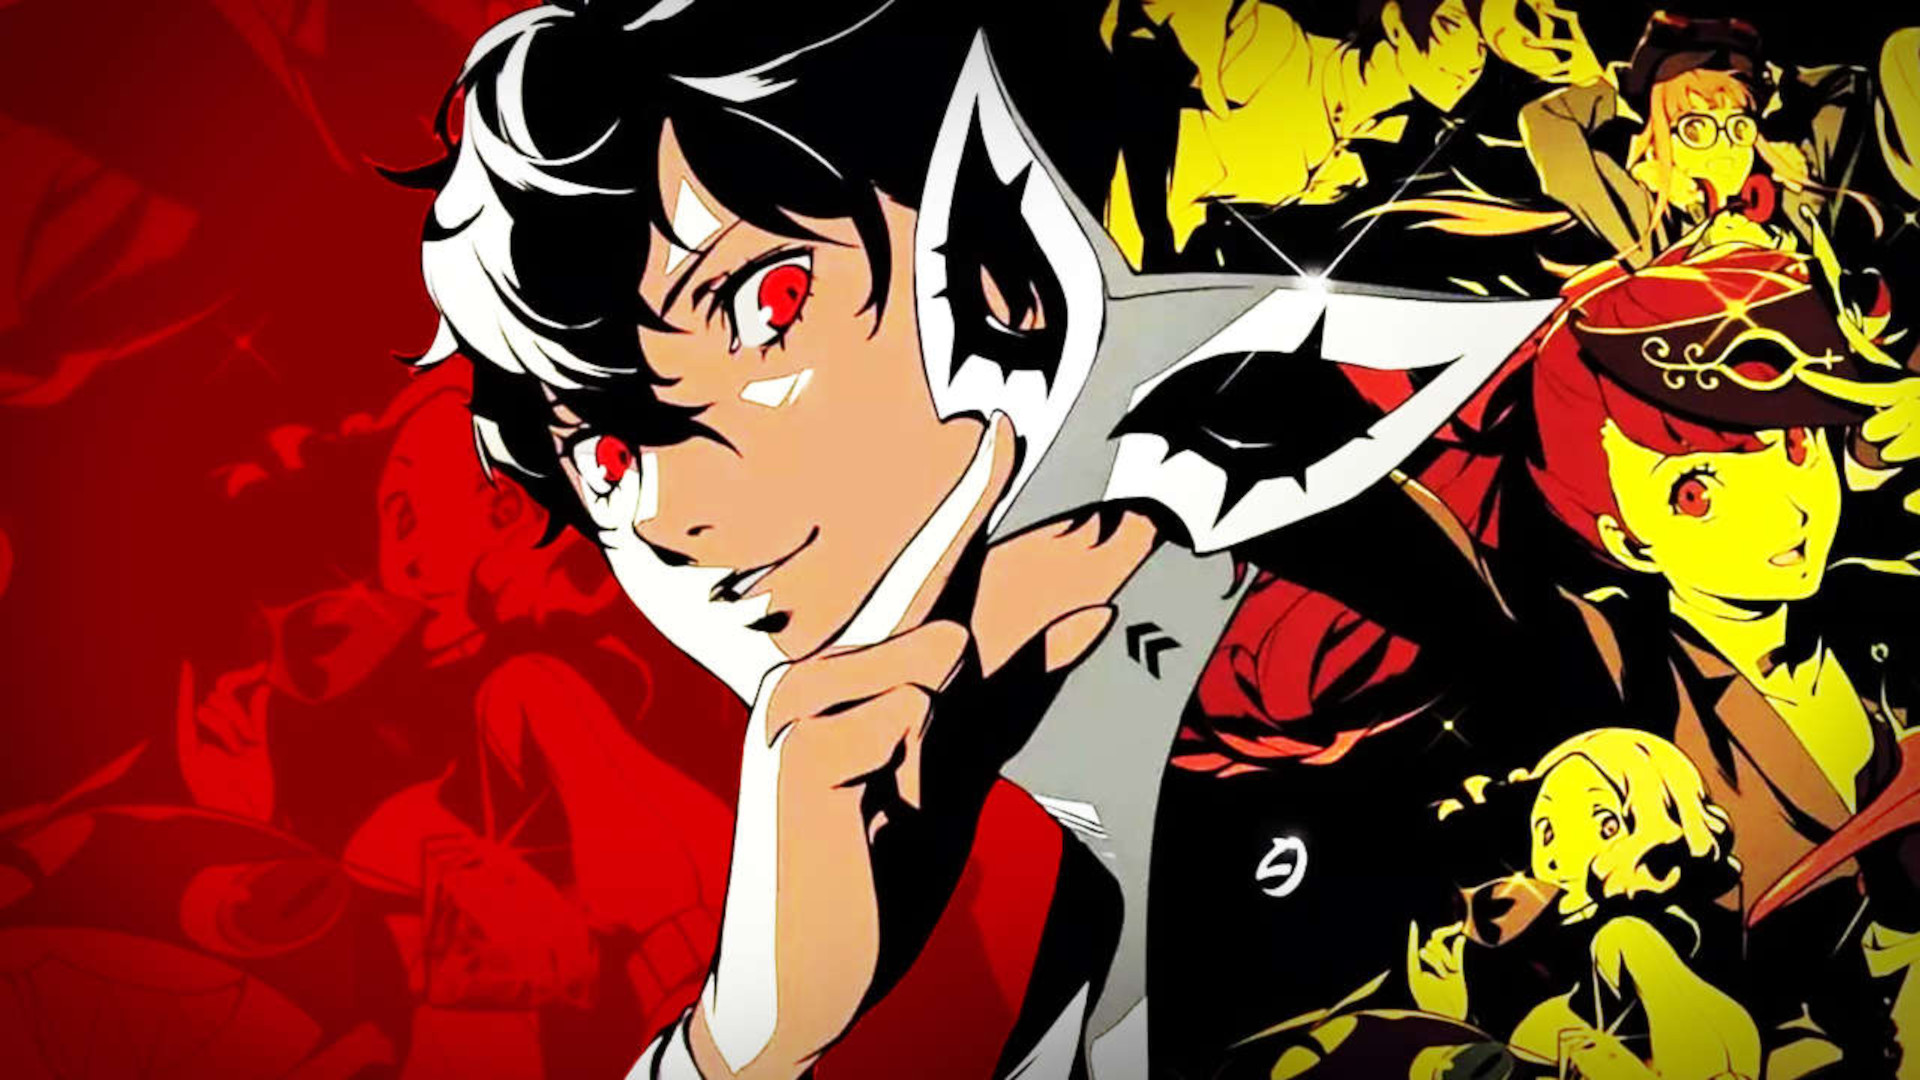 Persona 5 characters – all the playable Phantom Thieves